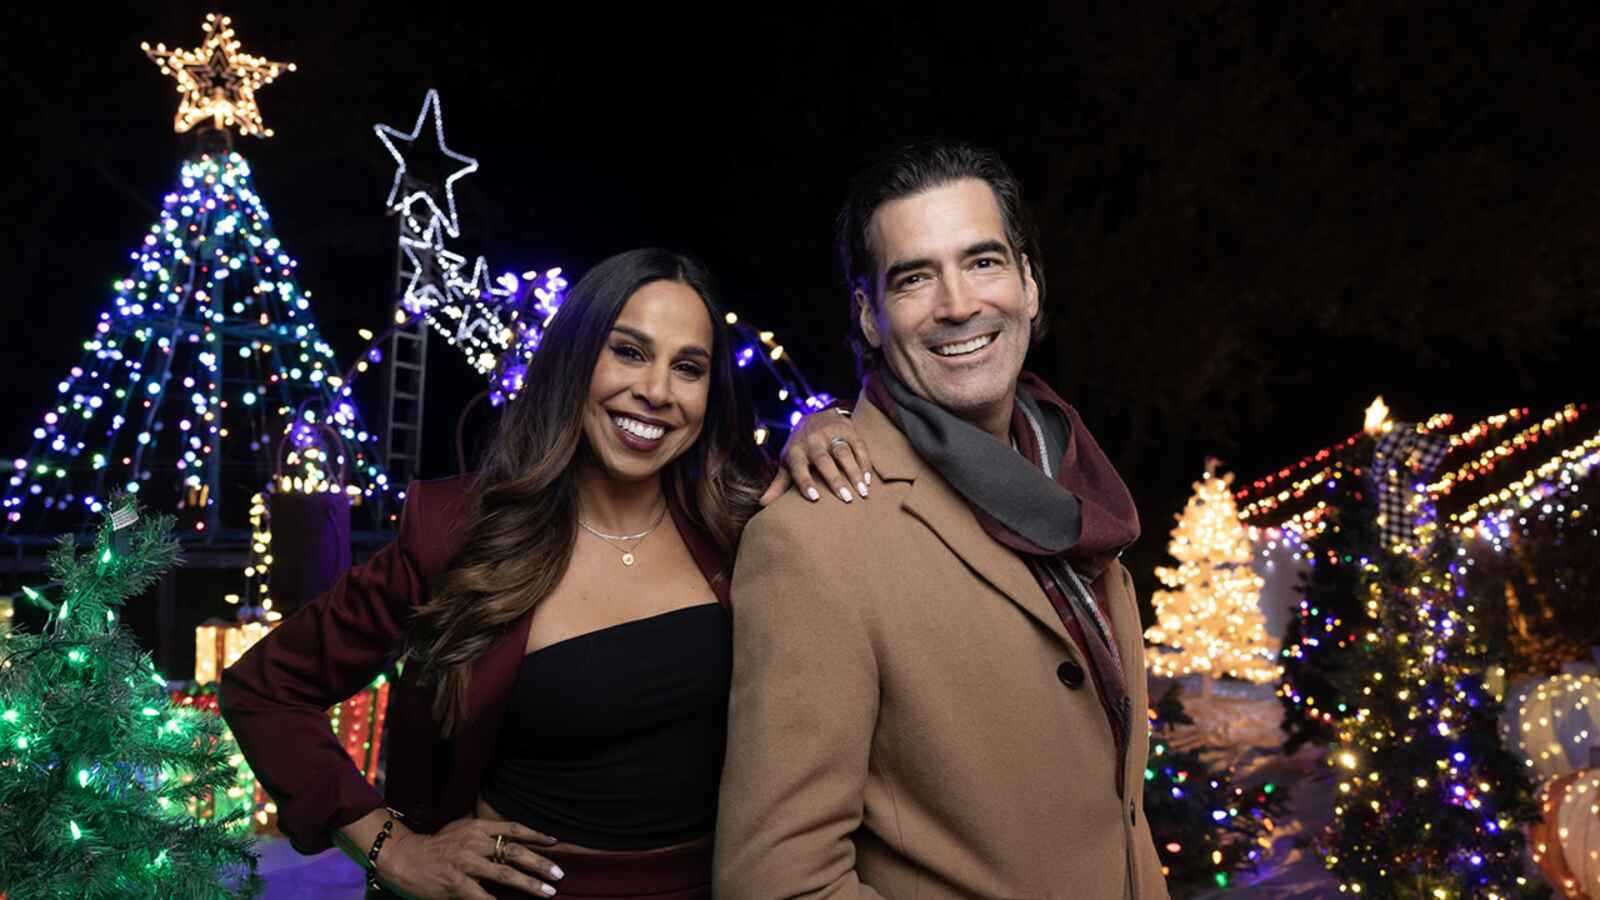 Spread The Holiday Spirit: Celebrities Light Up Hollywood With Festive Cheer